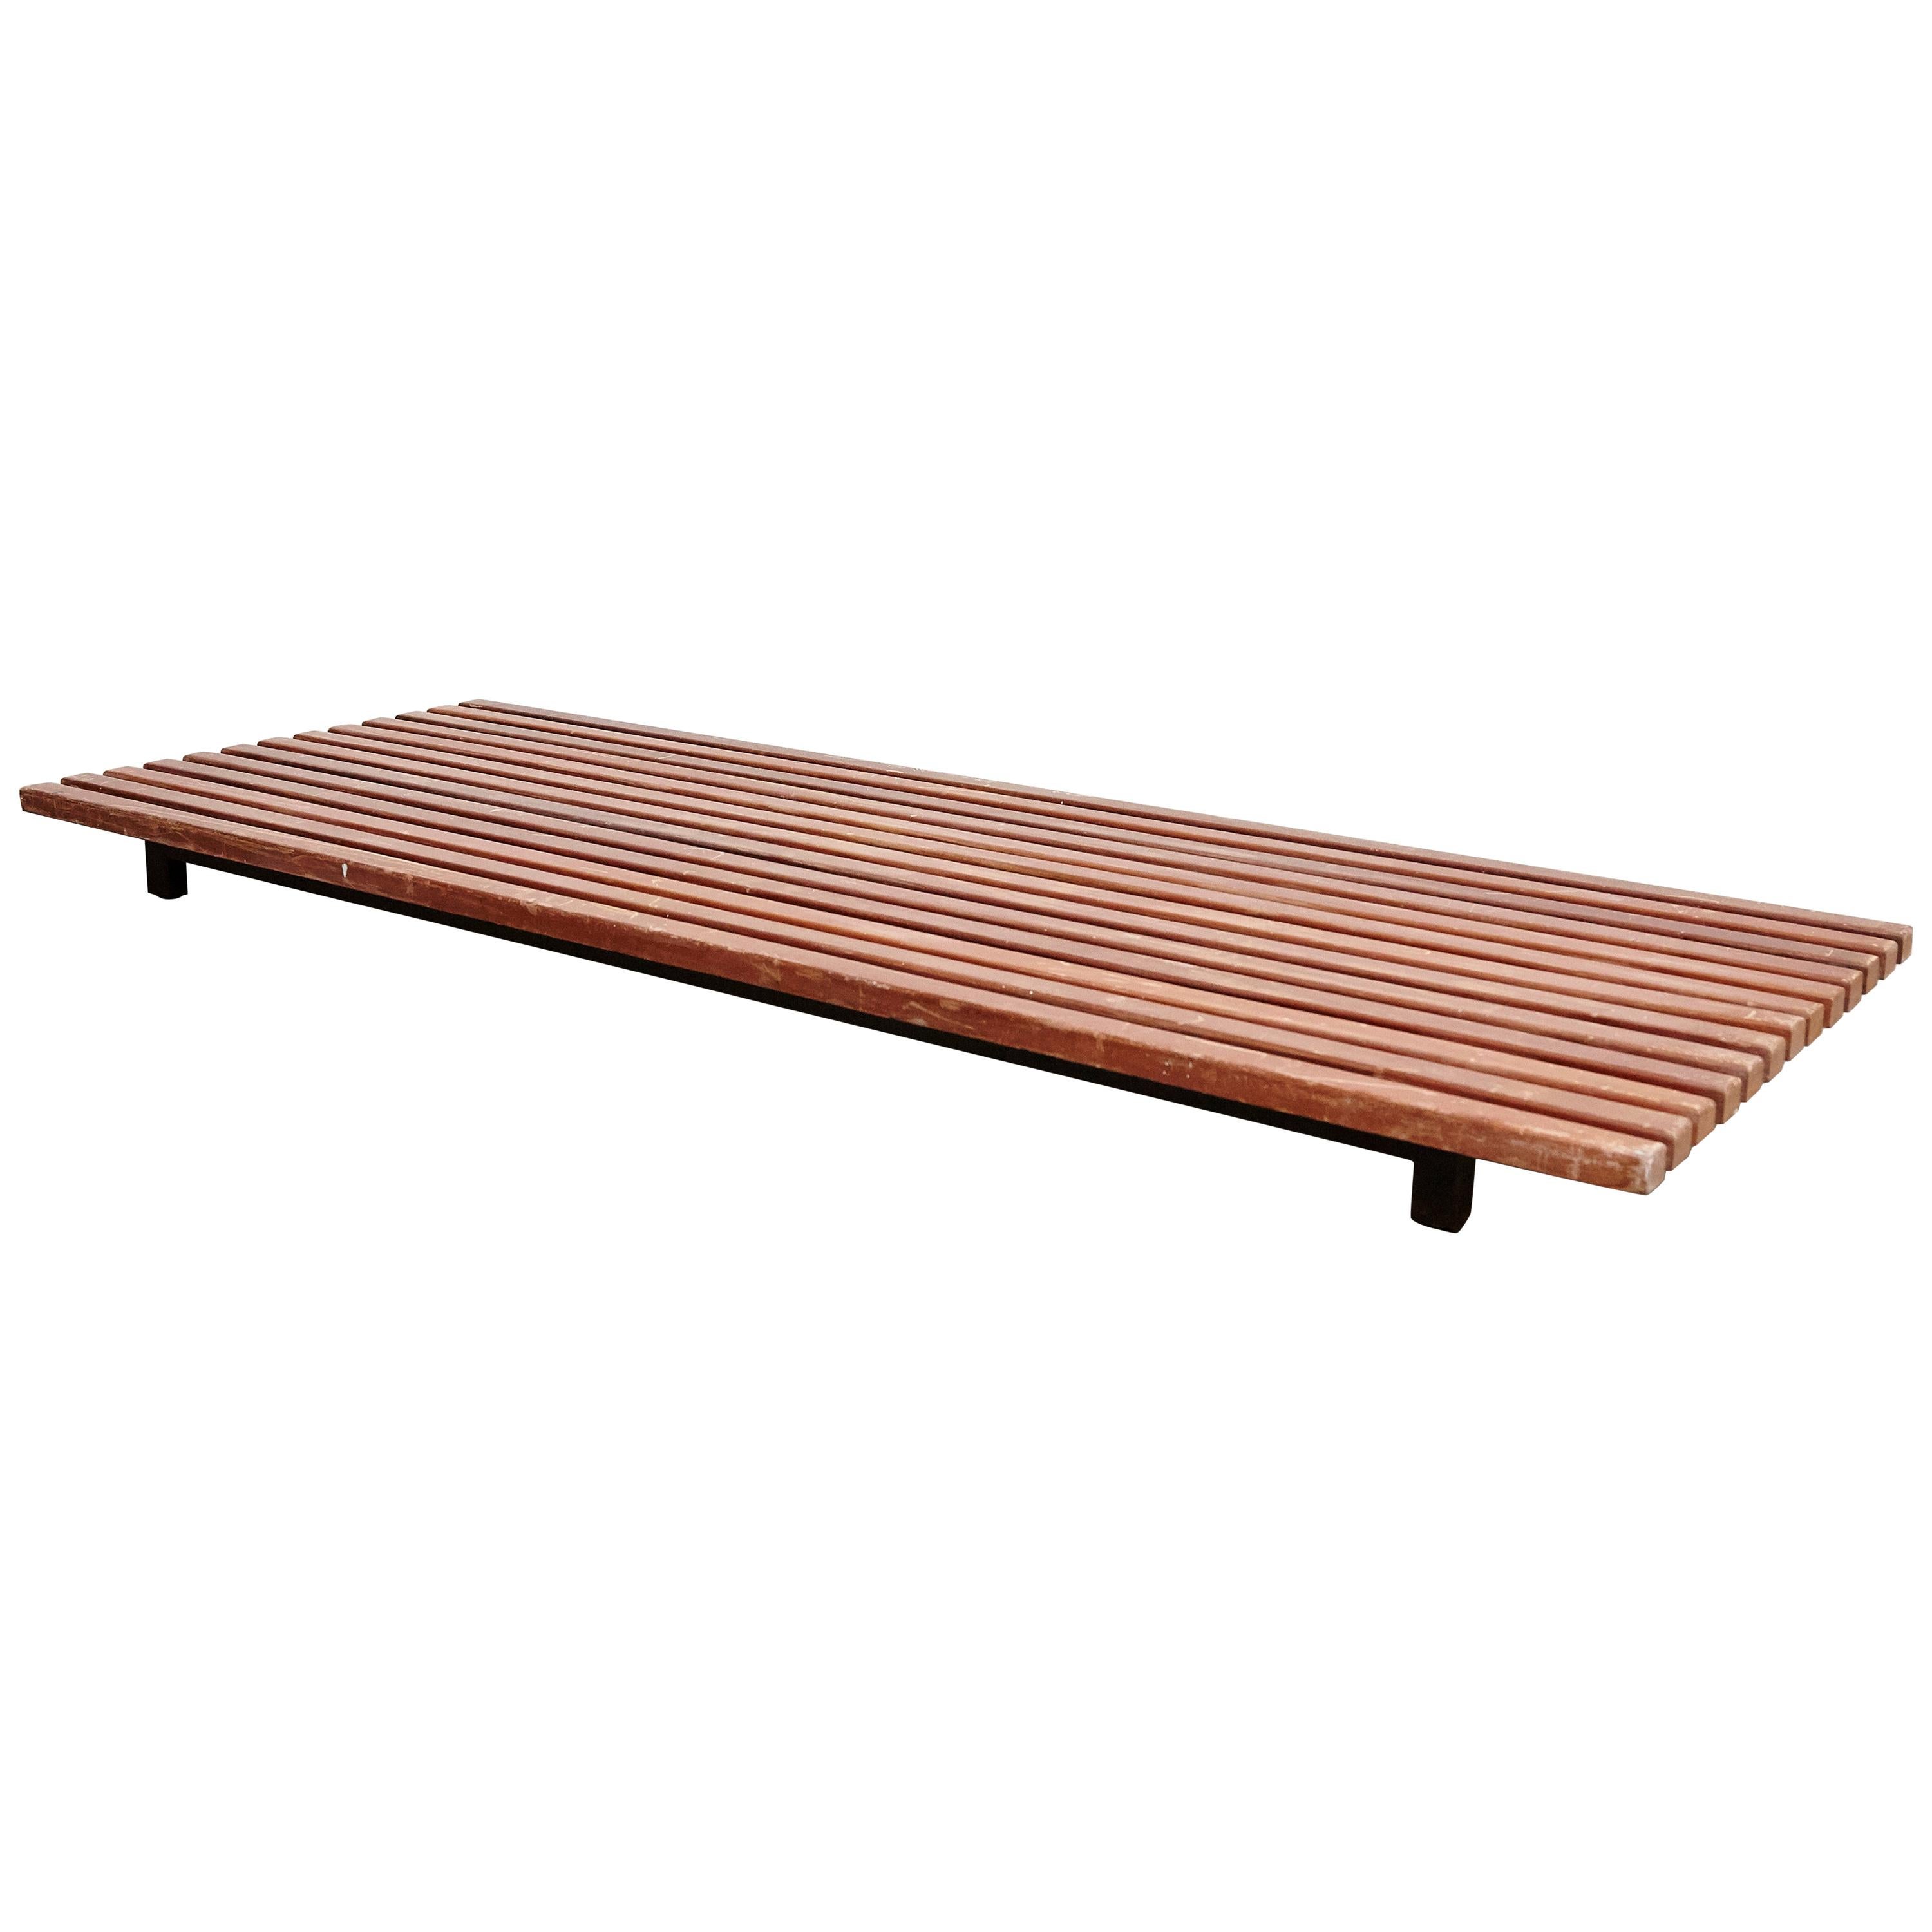 Charlotte Perriand Cansado Low Bench, circa 1950***** For Sale